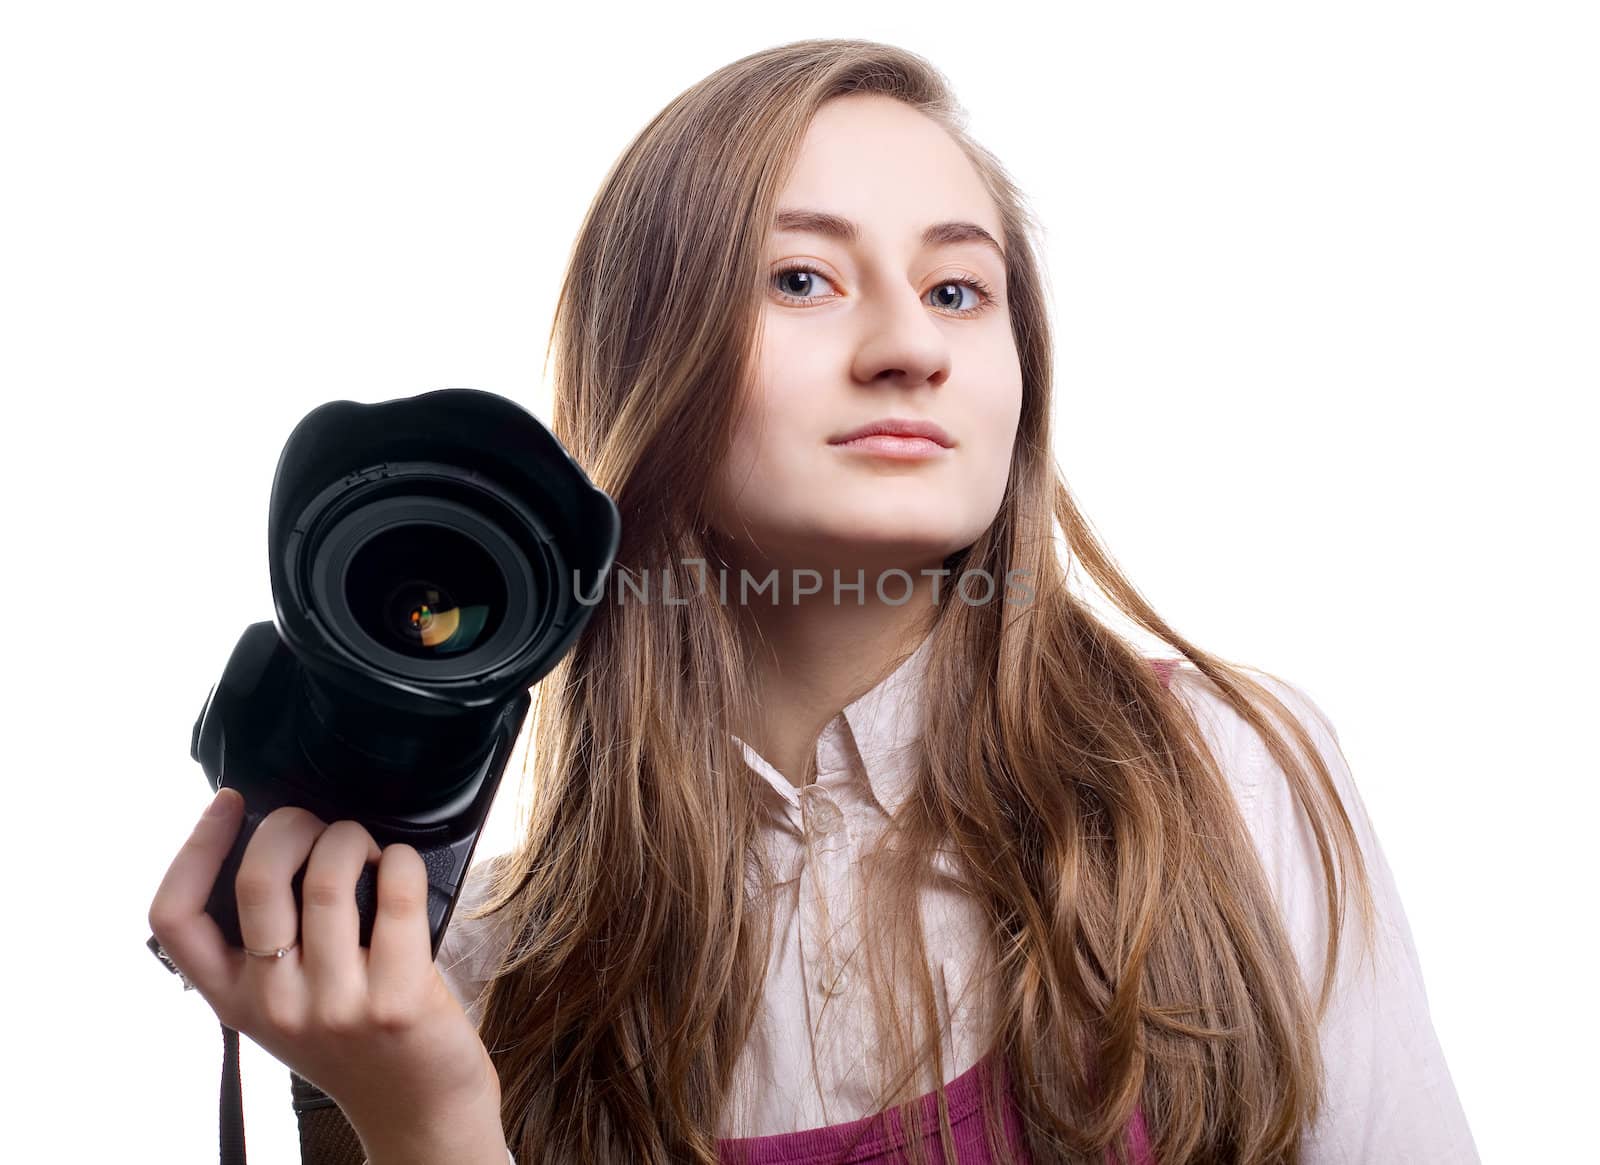 Young woman photographer by palinchak